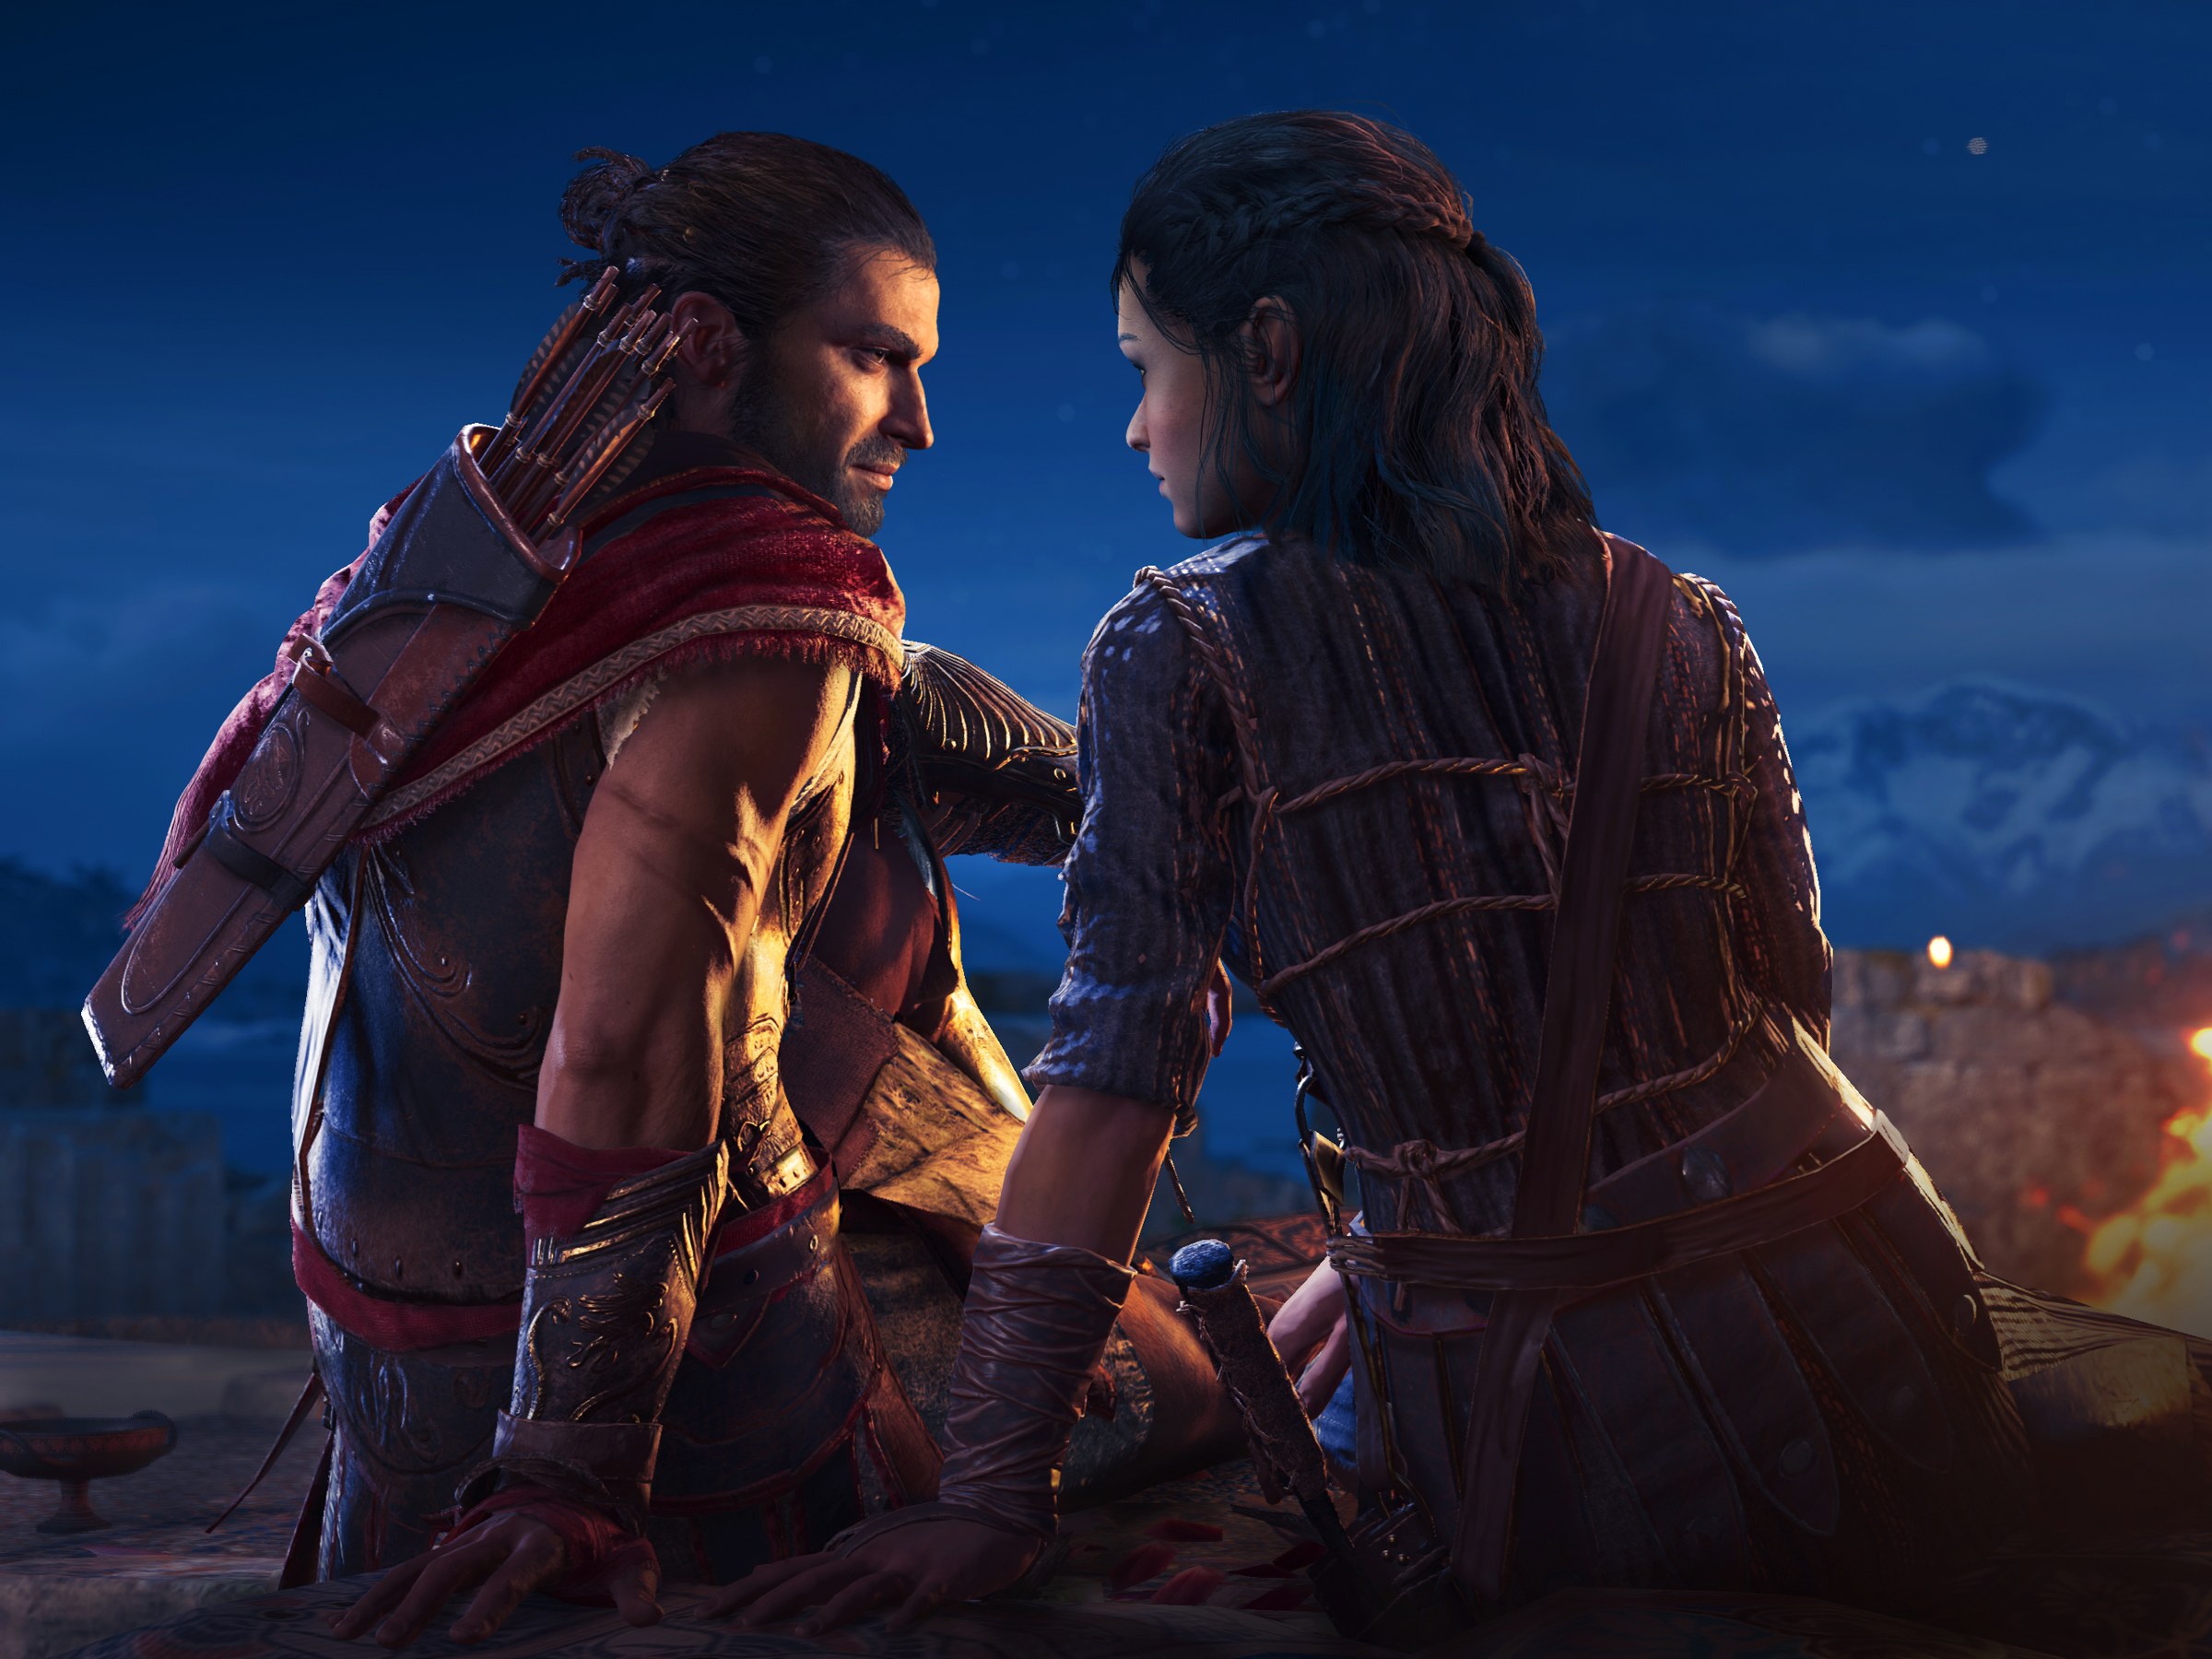 How Assassin's Creed Odyssey Revitalized The Franchise